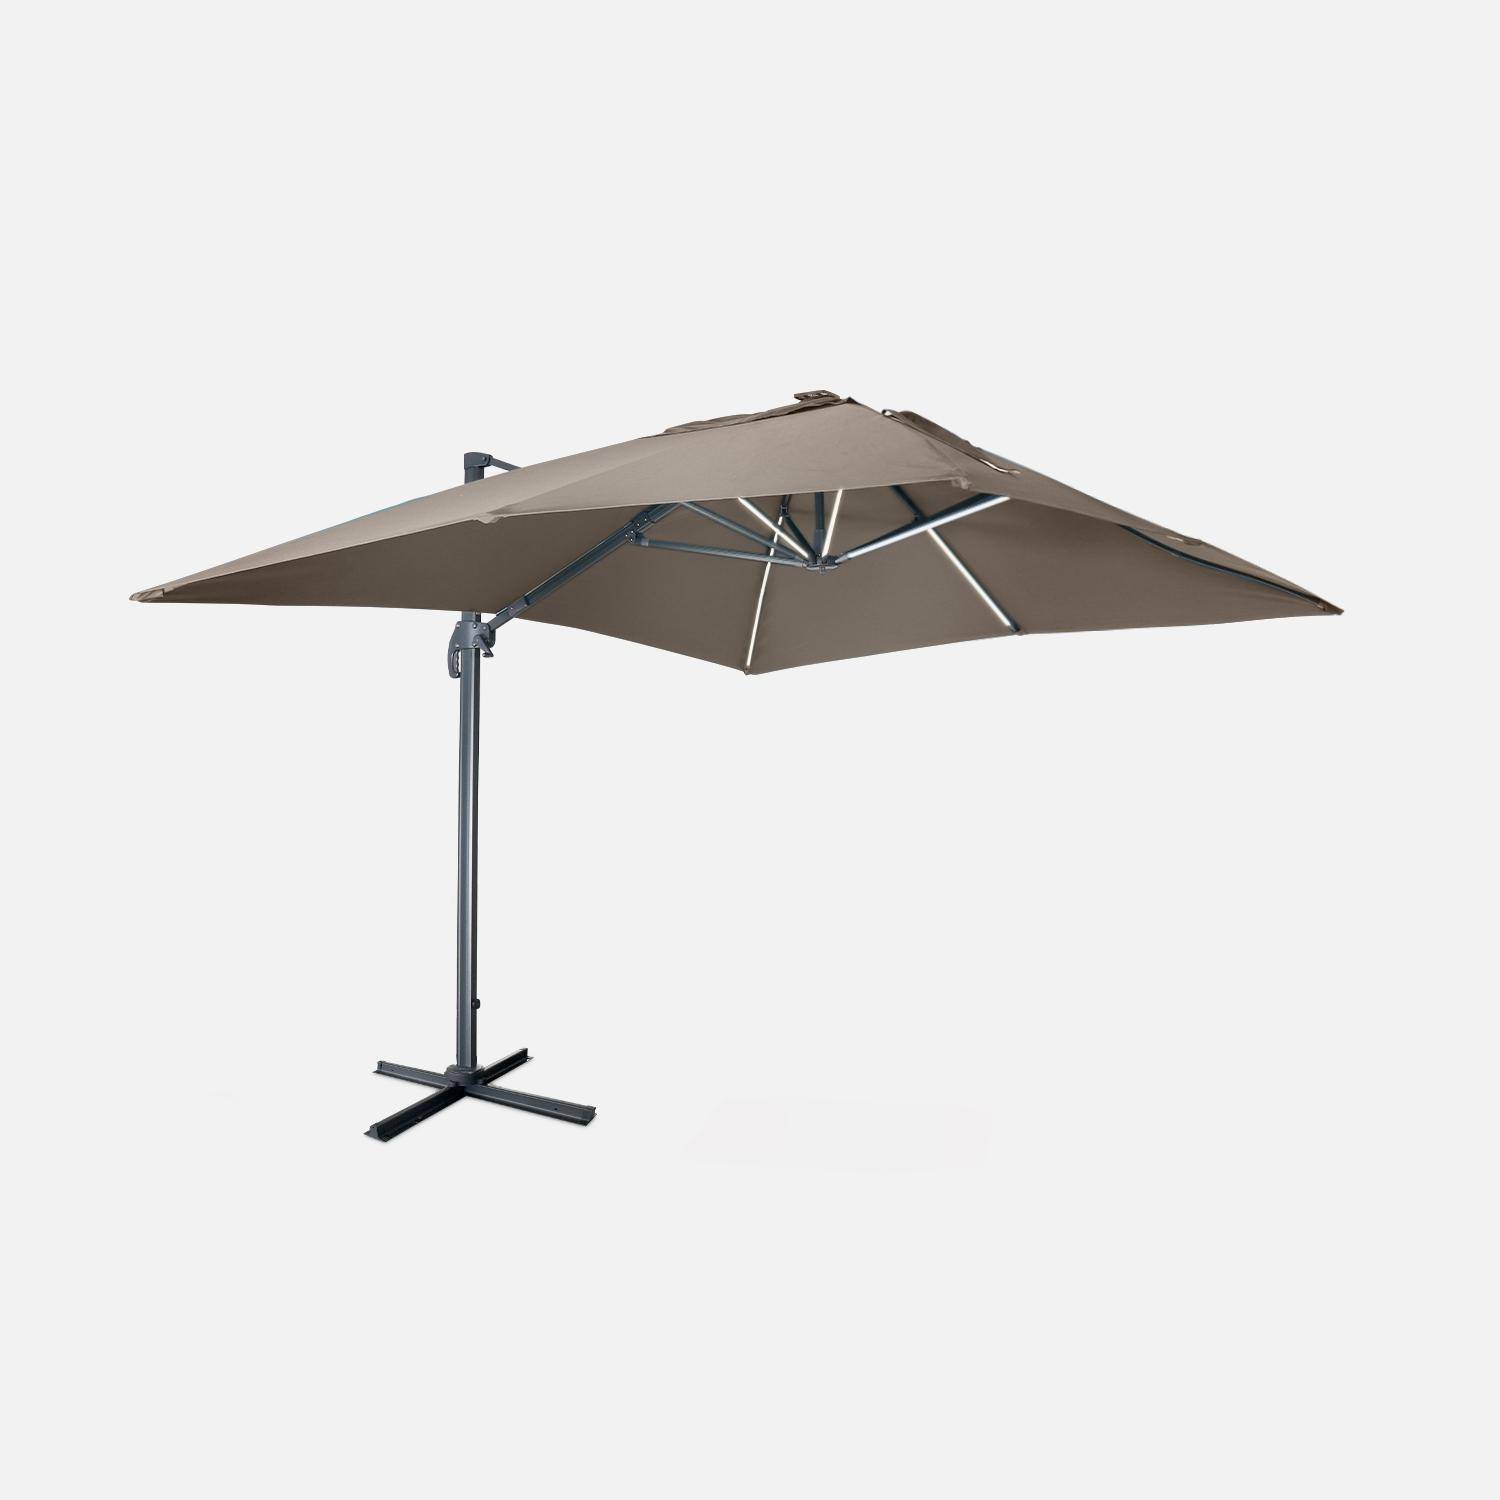 Premium rectangular 3x4m cantilever parasol with solar-powered integrated LED lights - Cantilever parasol, tiltable, foldable with 360° rotation, solar charging, cover included - Luce - Beige-brown,sweeek,Photo1